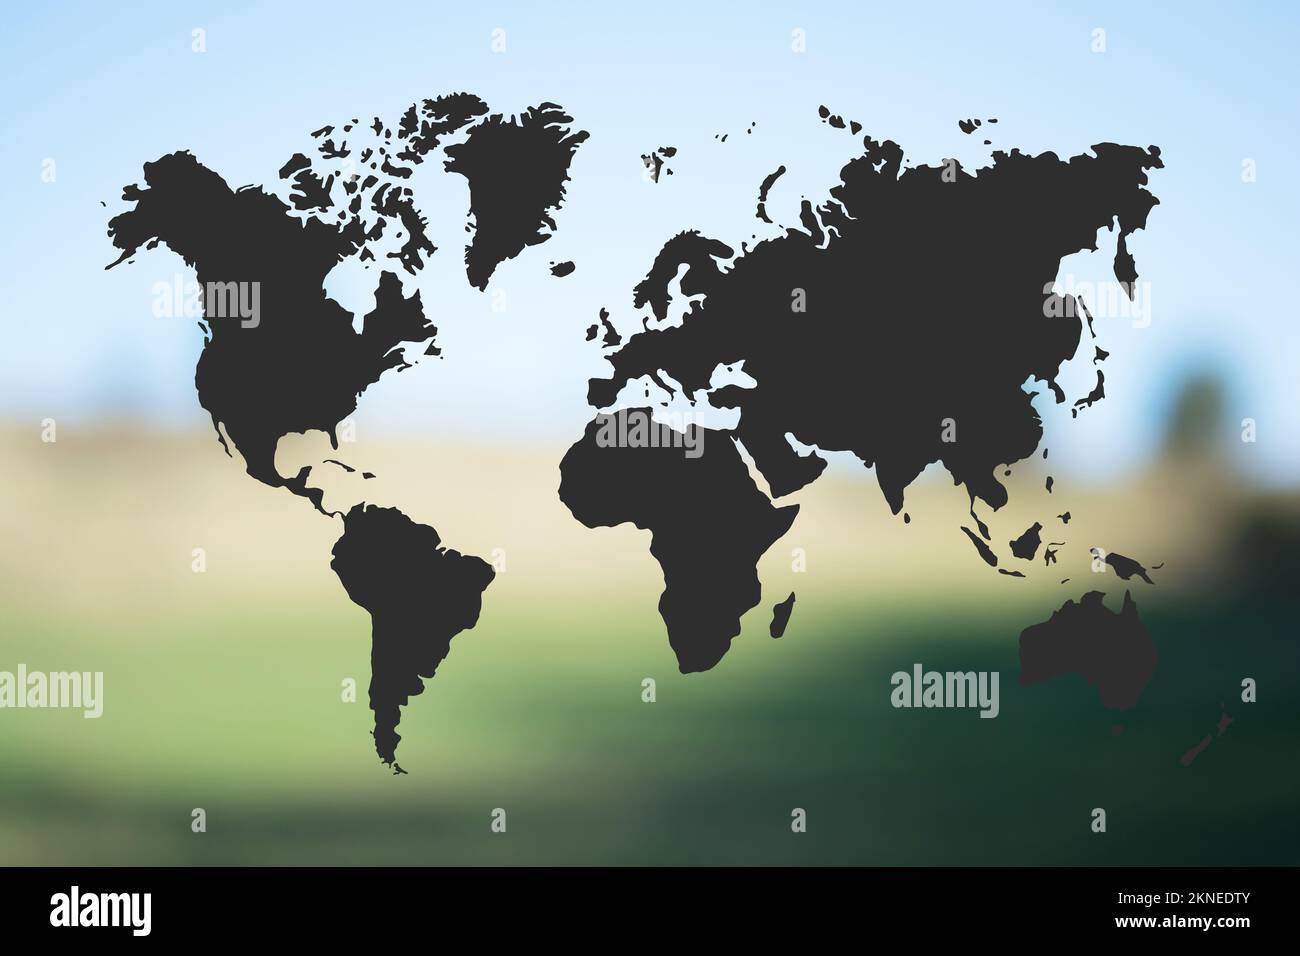 world map and defocused background Stock Photo